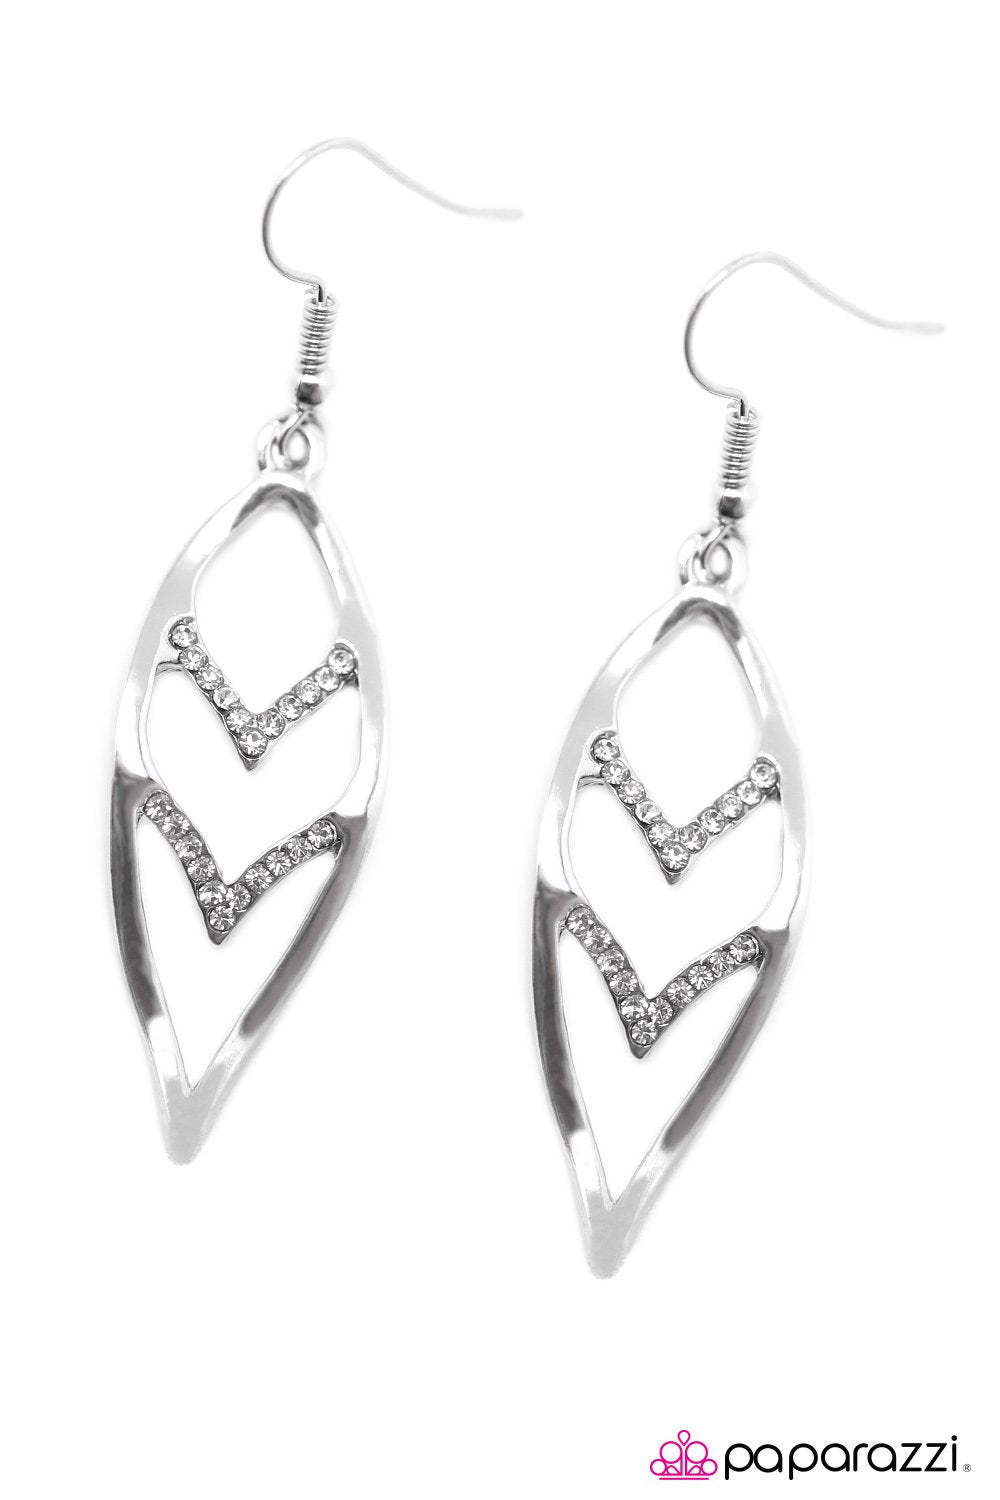 Check Please! White Earrings - Paparazzi Accessories-CarasShop.com - $5 Jewelry by Cara Jewels